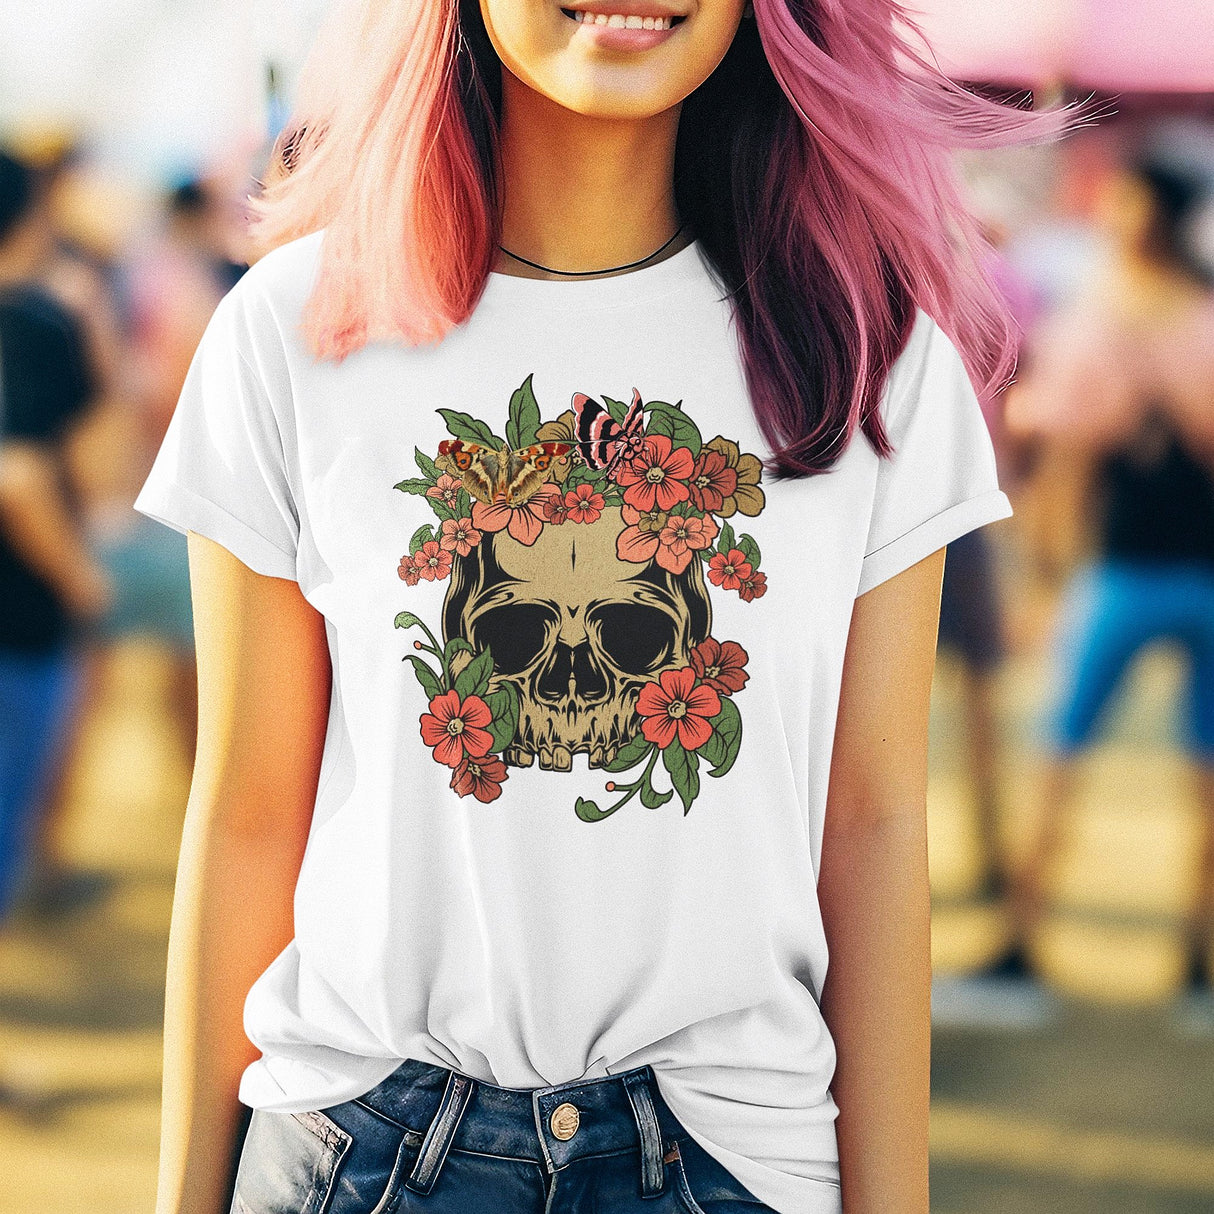 roses-and-skull-life-tee-outdoors-t-shirt-life-tee-feminine-t-shirt-edgy-tee#color_white